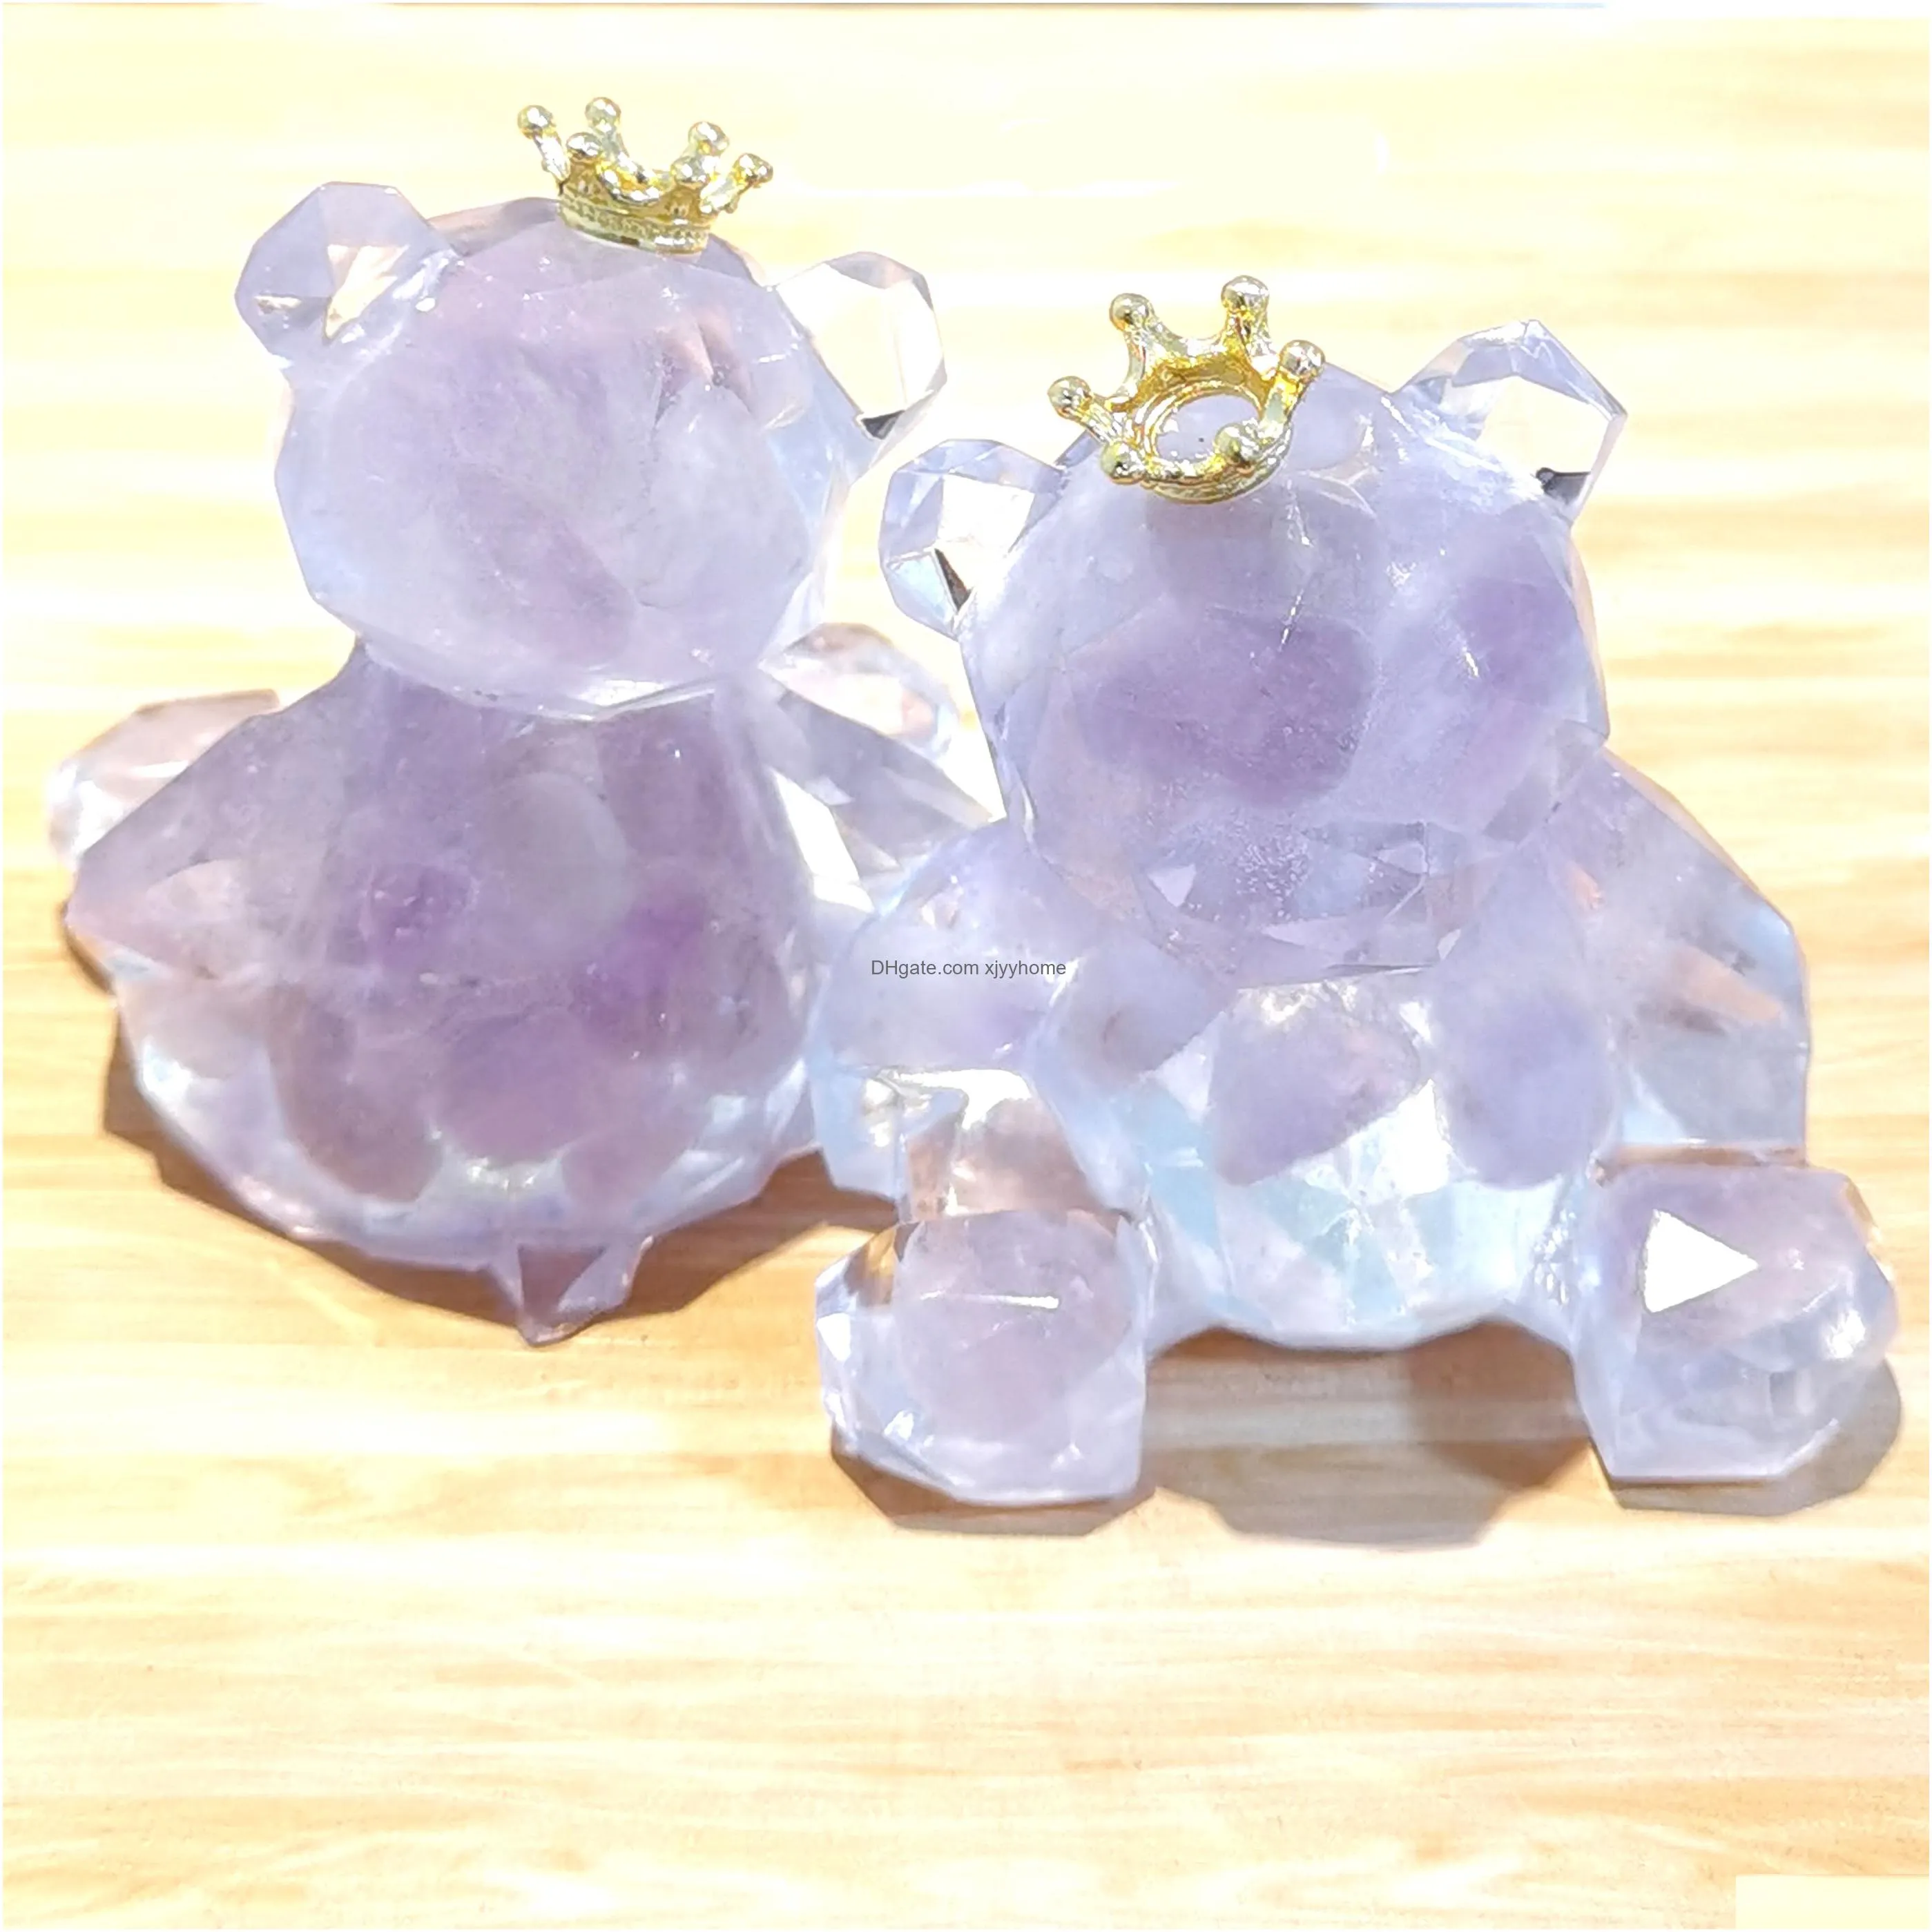 Decorative Objects & Figurines Decorative Figurines Amethyst Crystal Bear Desk Decor Gifts For Kids Women Girlfriend Home Decorations Dhcf9